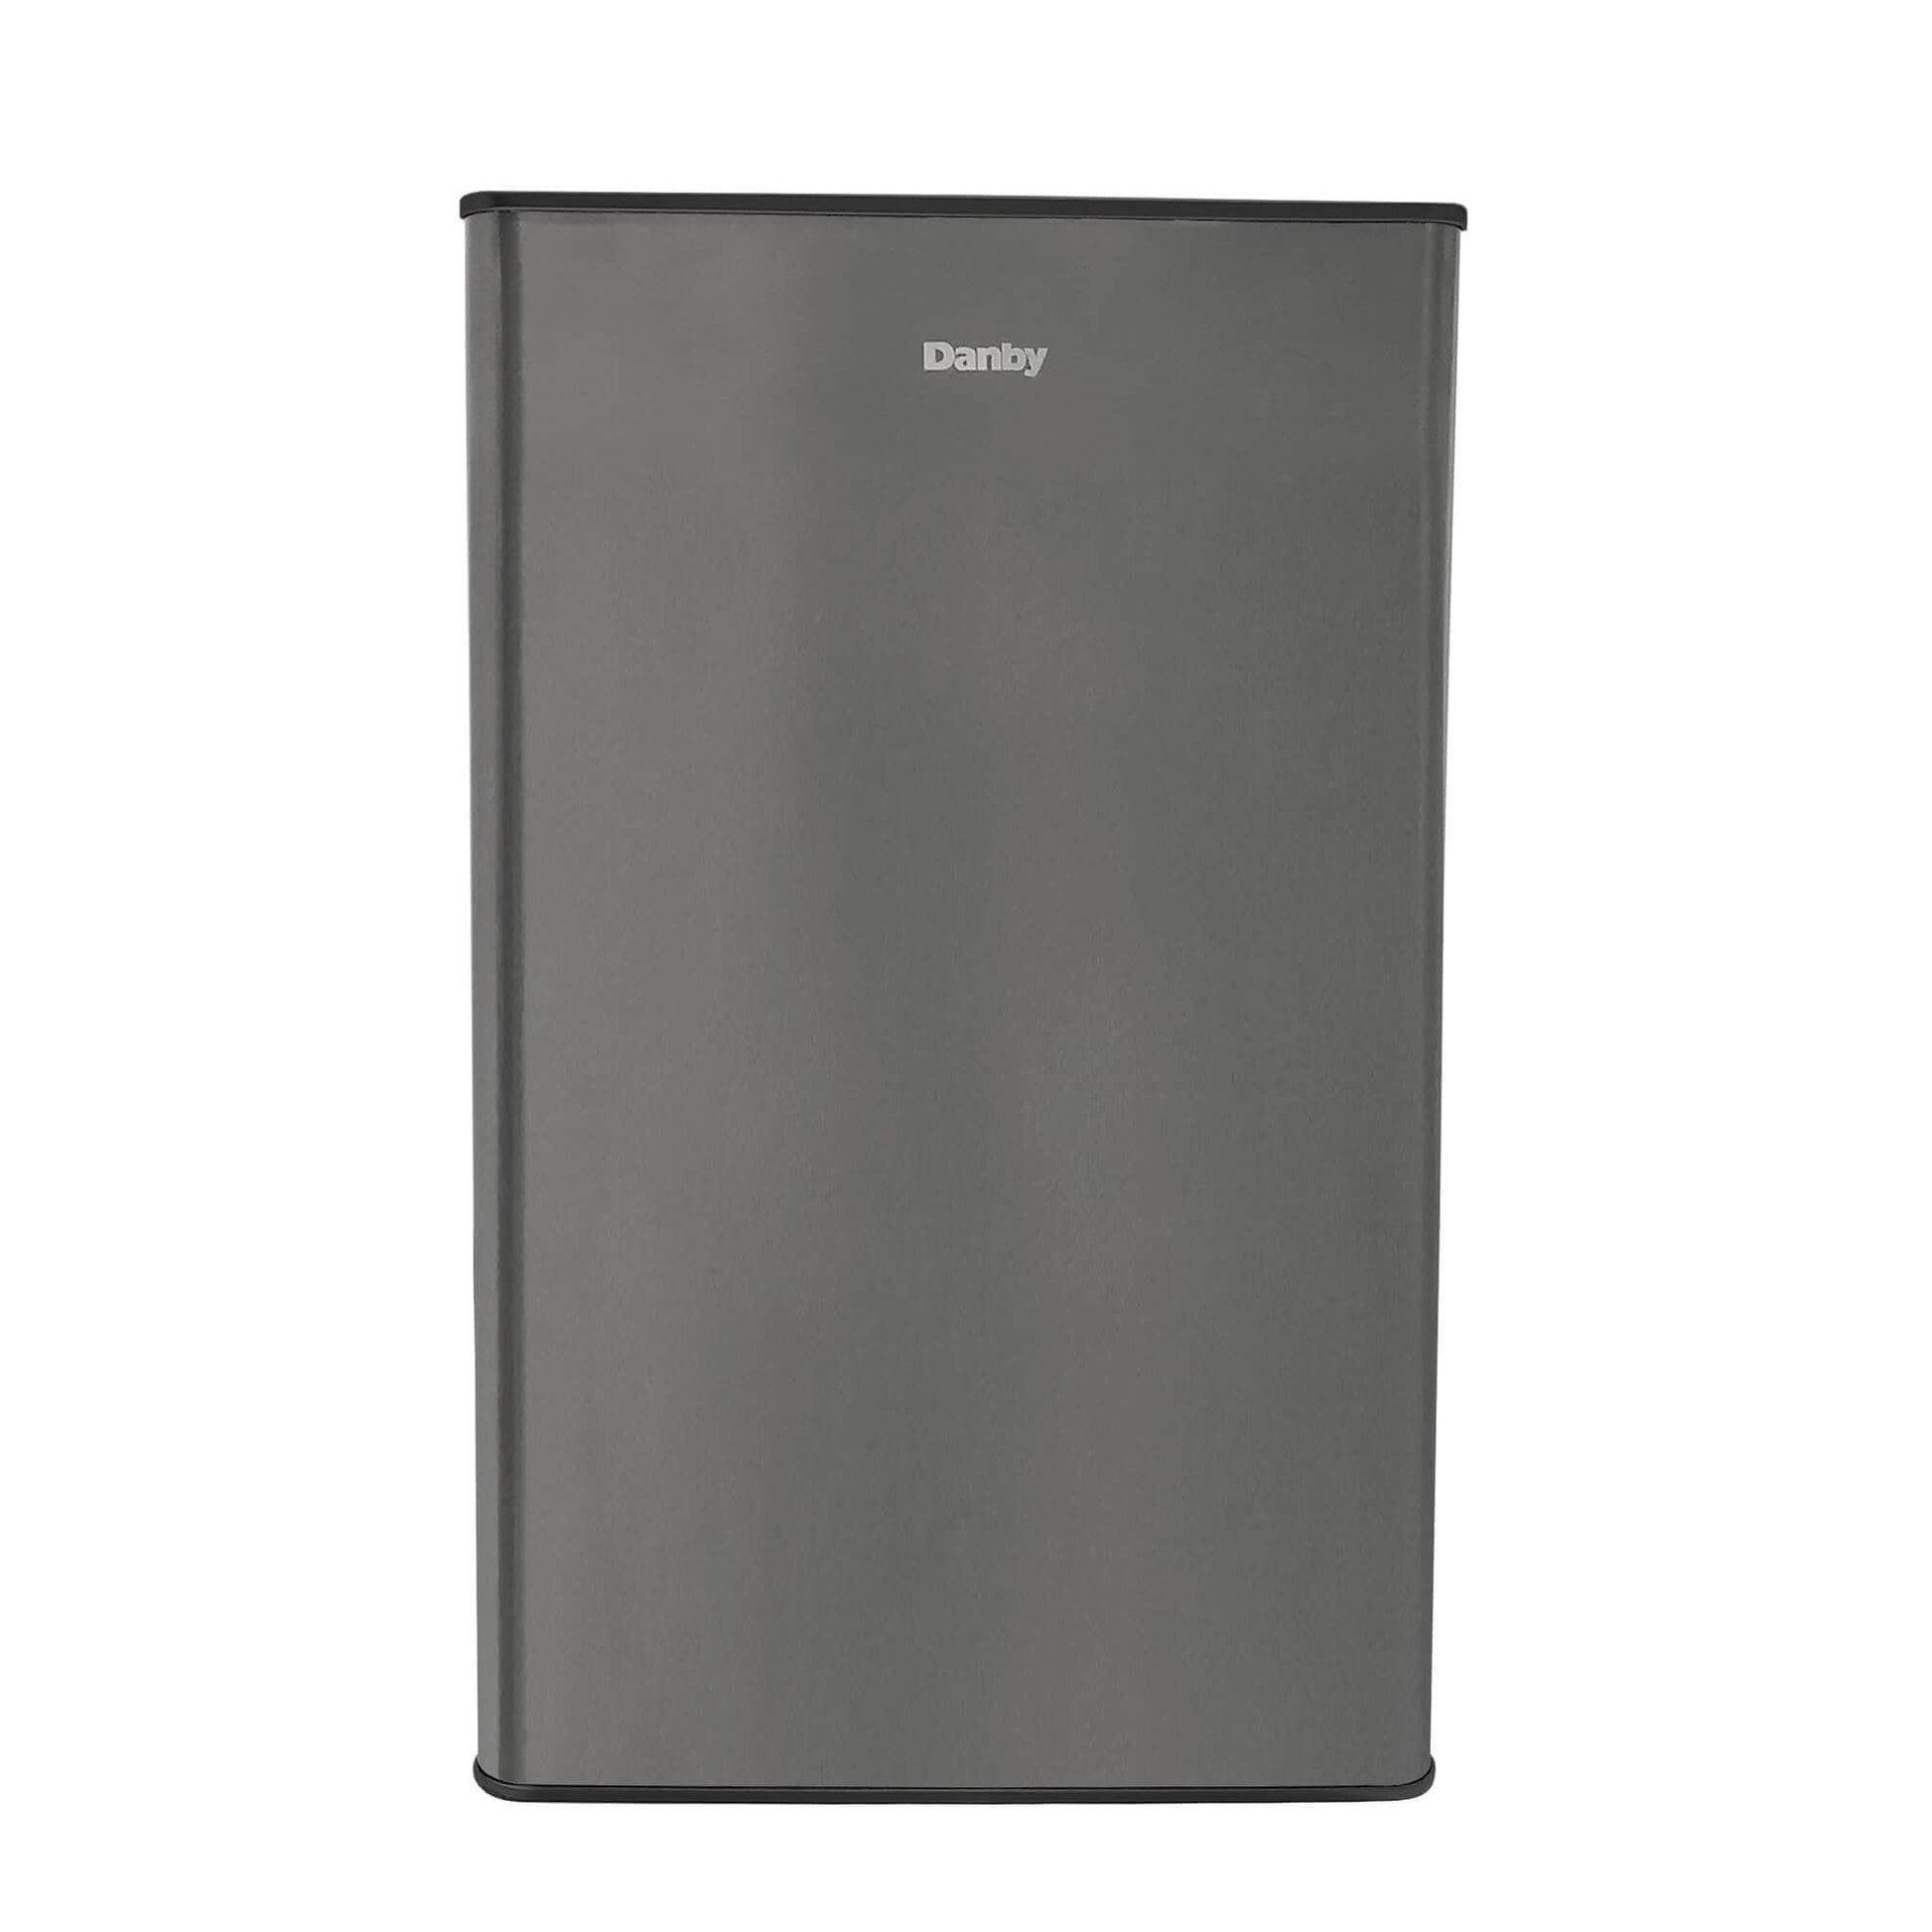 Danby Designer 4.4 Cu. Ft. Compact Refrigerator in Stainless Look